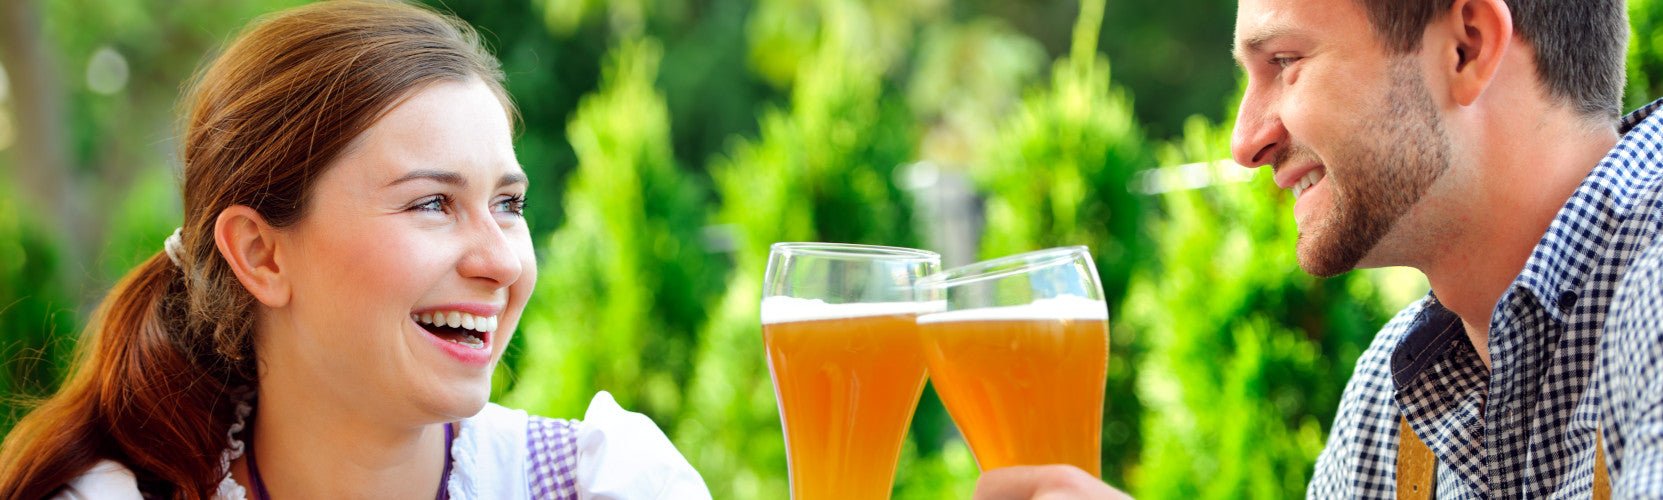 Top 6 Everyday German Beer Drinking Traditions to Try Today - Germandrinks.co.uk